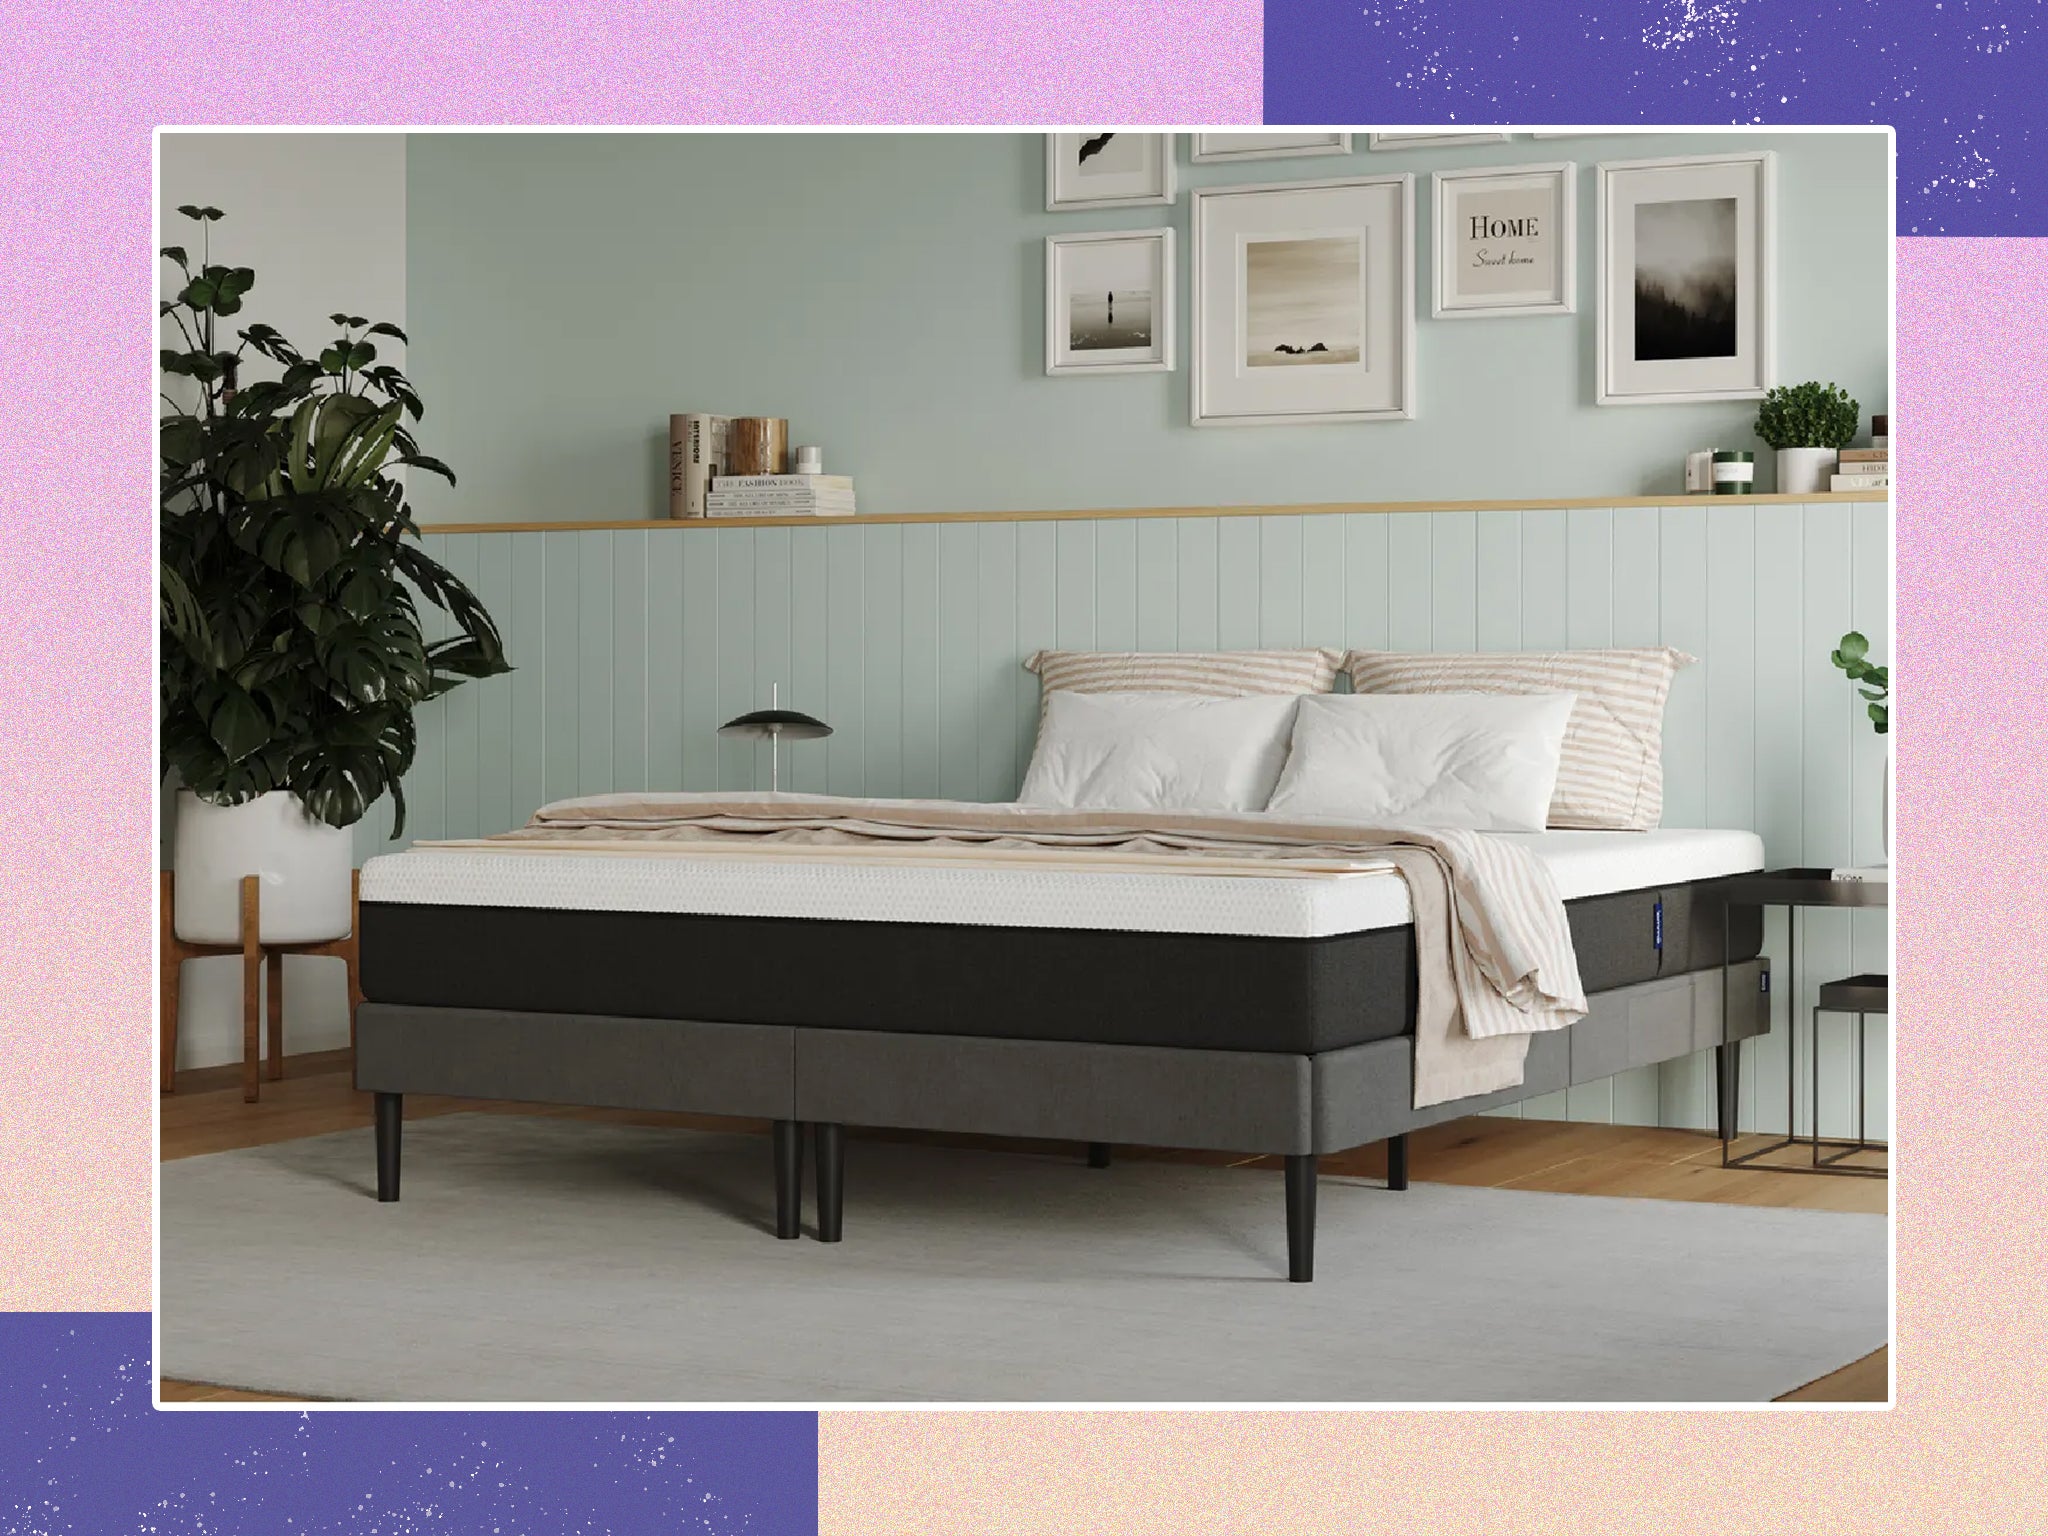 Emma’s premium plus mattress offers an incredibly comfy and cosy night’s sleep